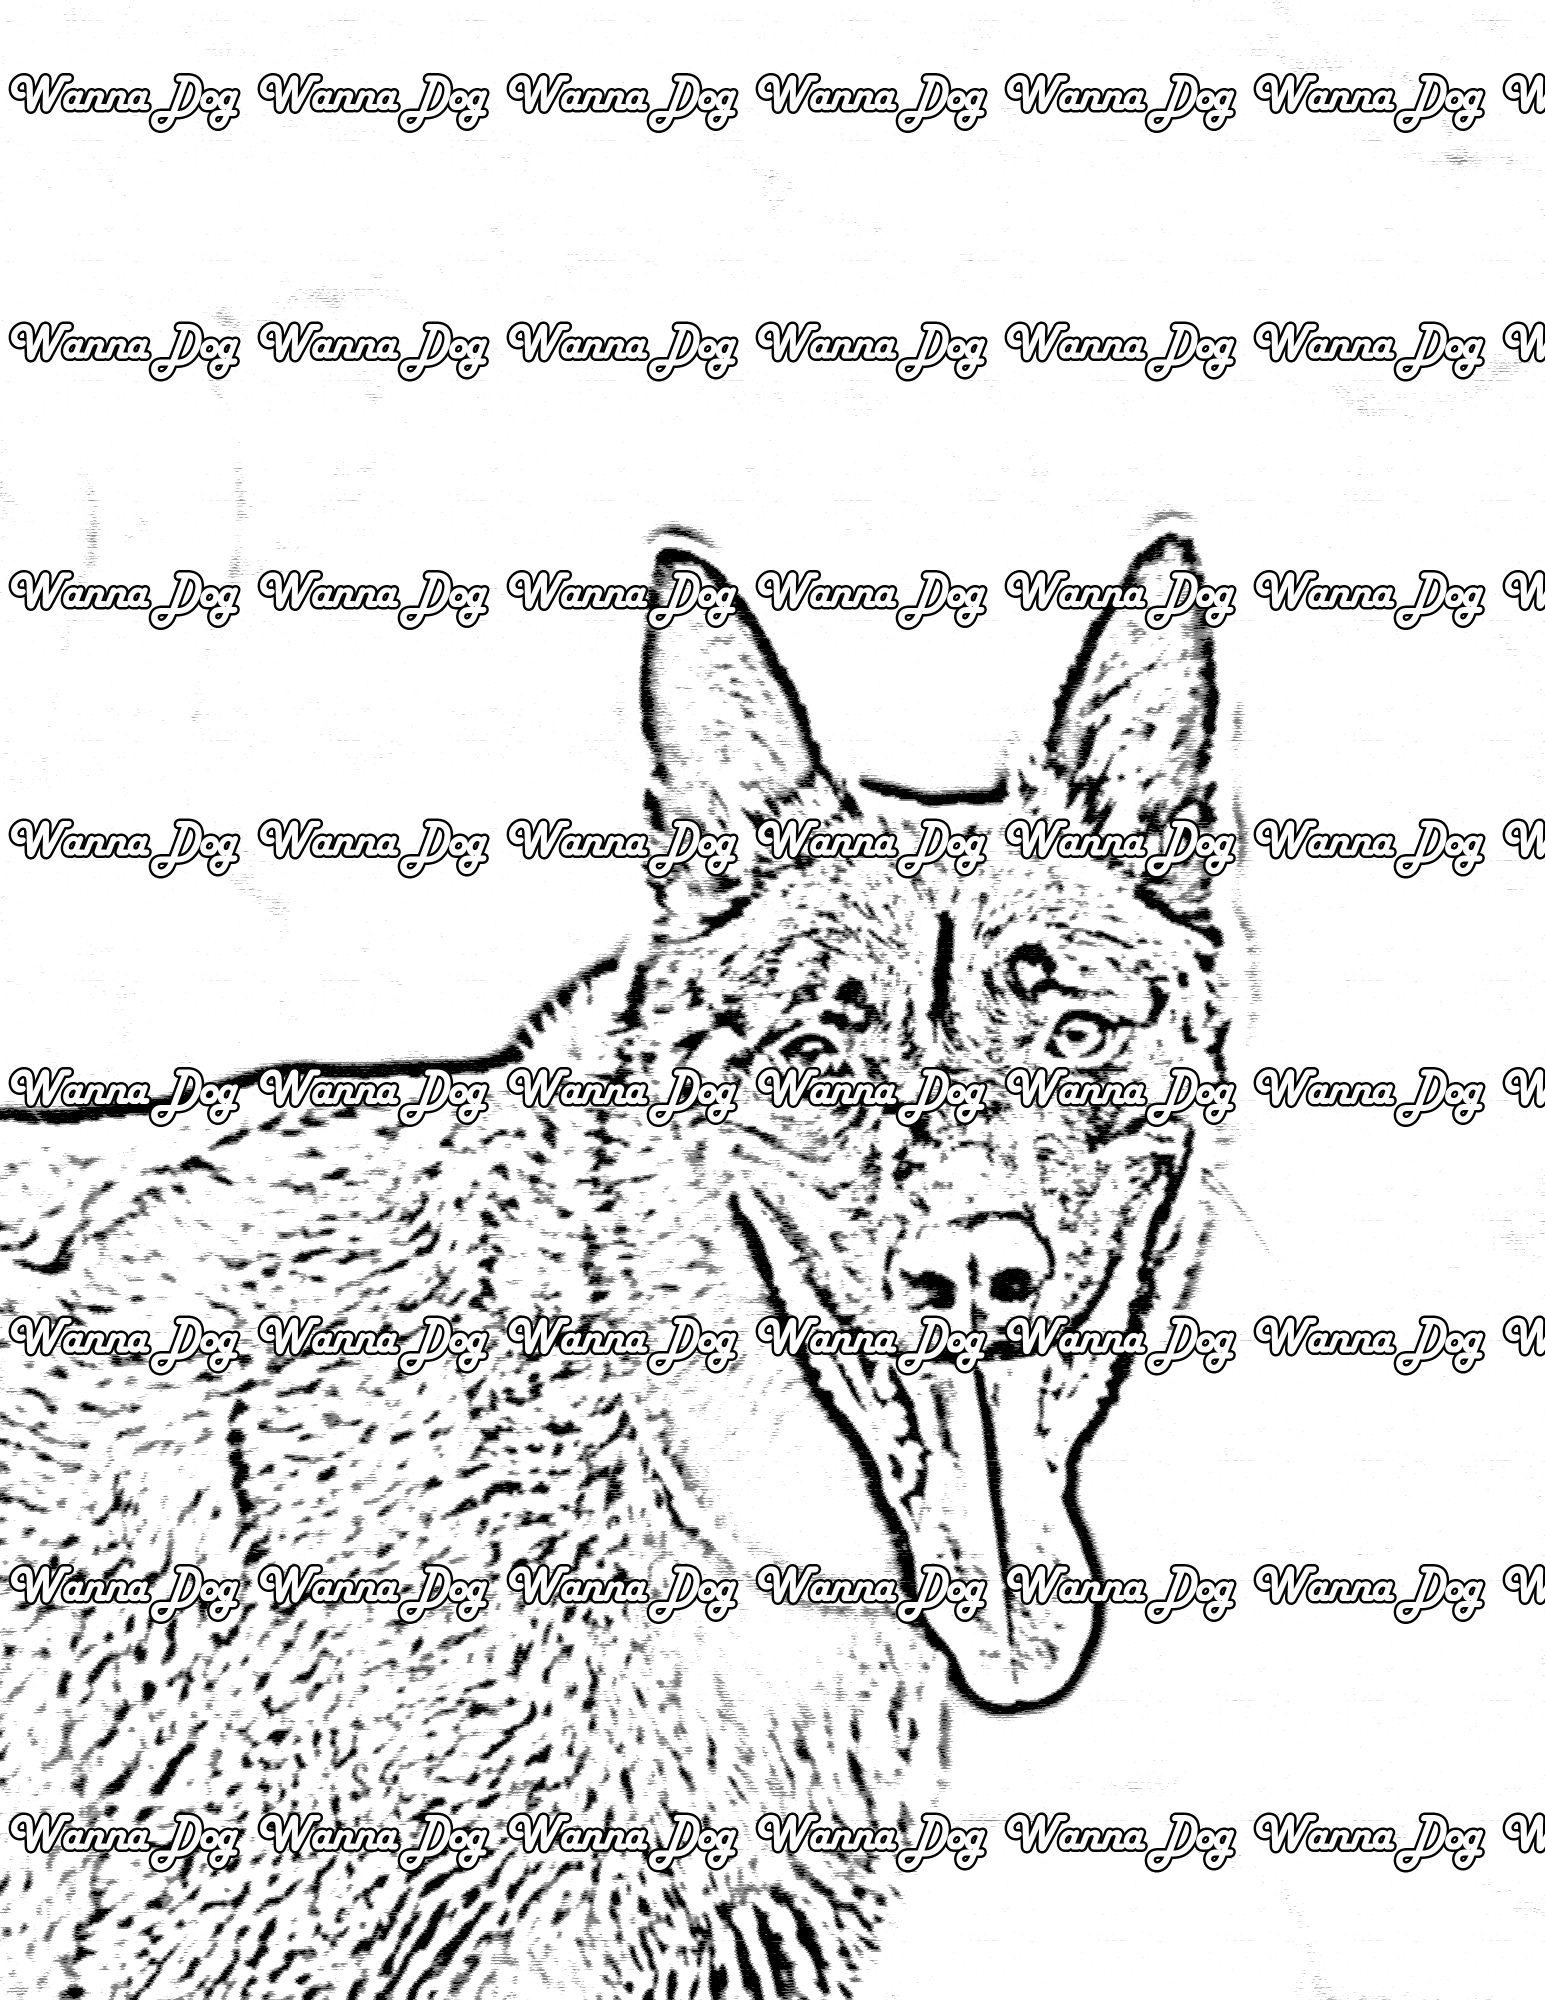 Belgian Malinois Coloring Page of a Belgian Malinois close up with their tongue out